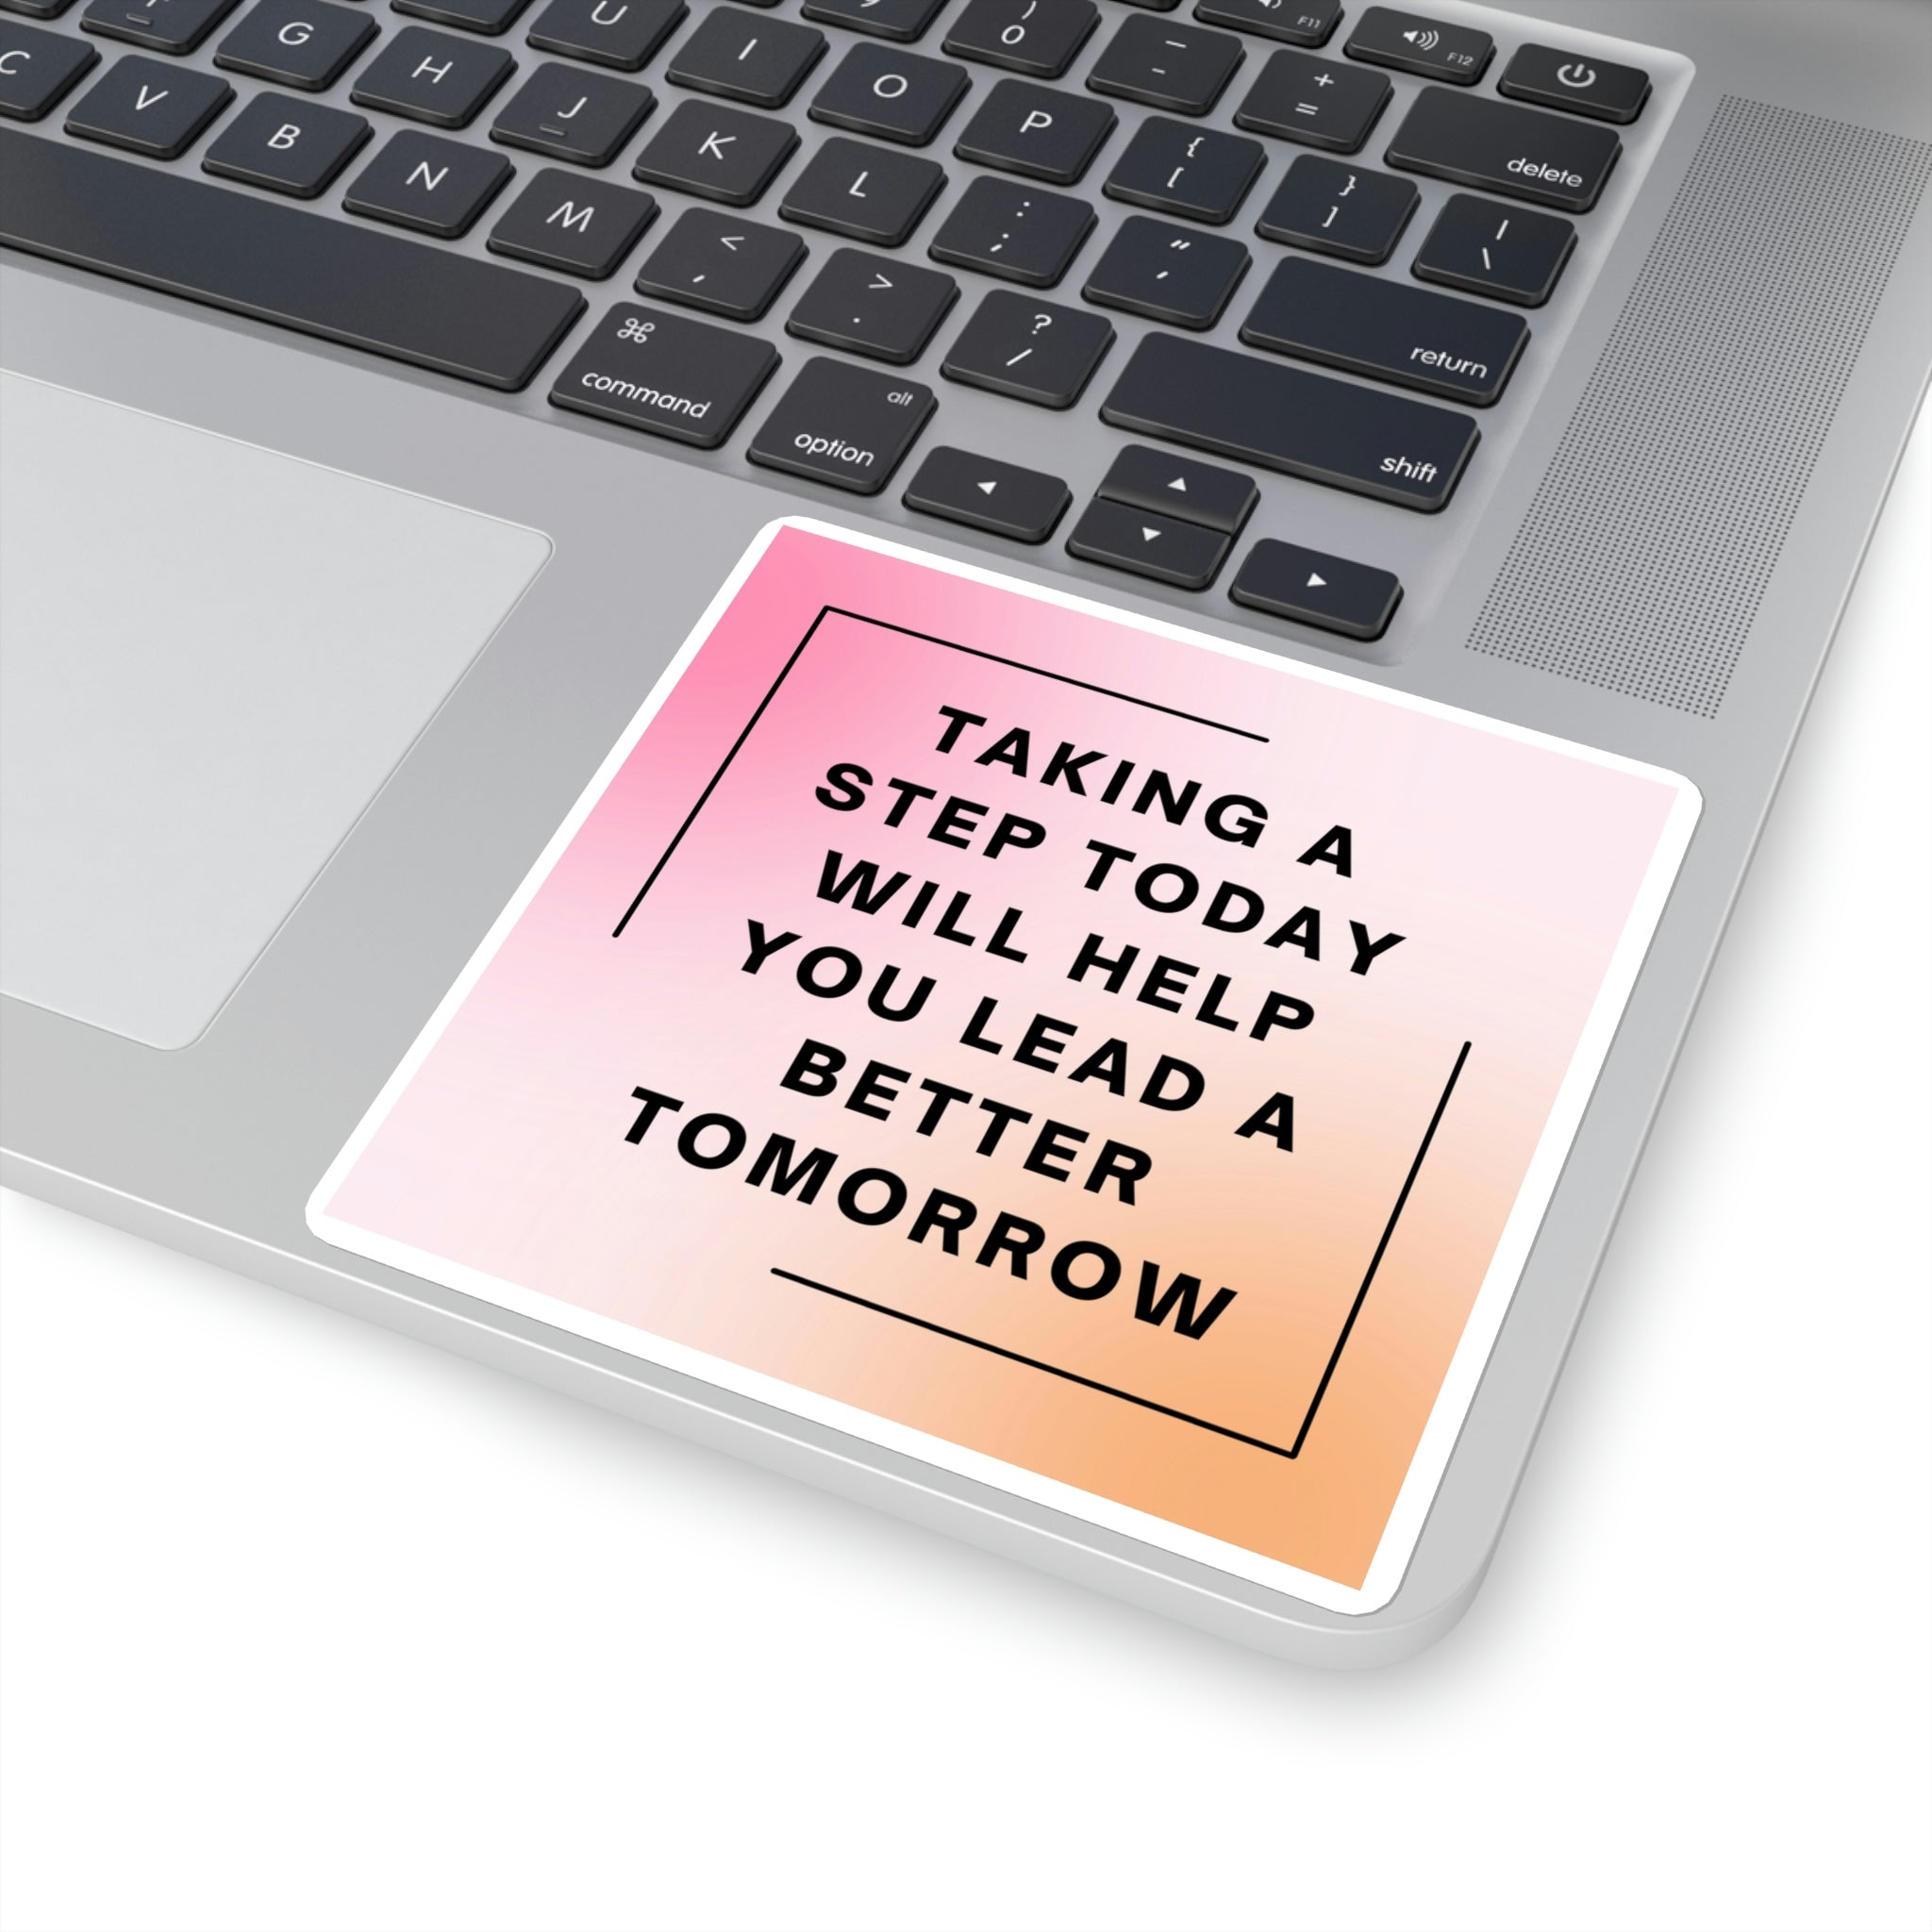 "Taking a step today will help you lead a better tomorrow" Sticker